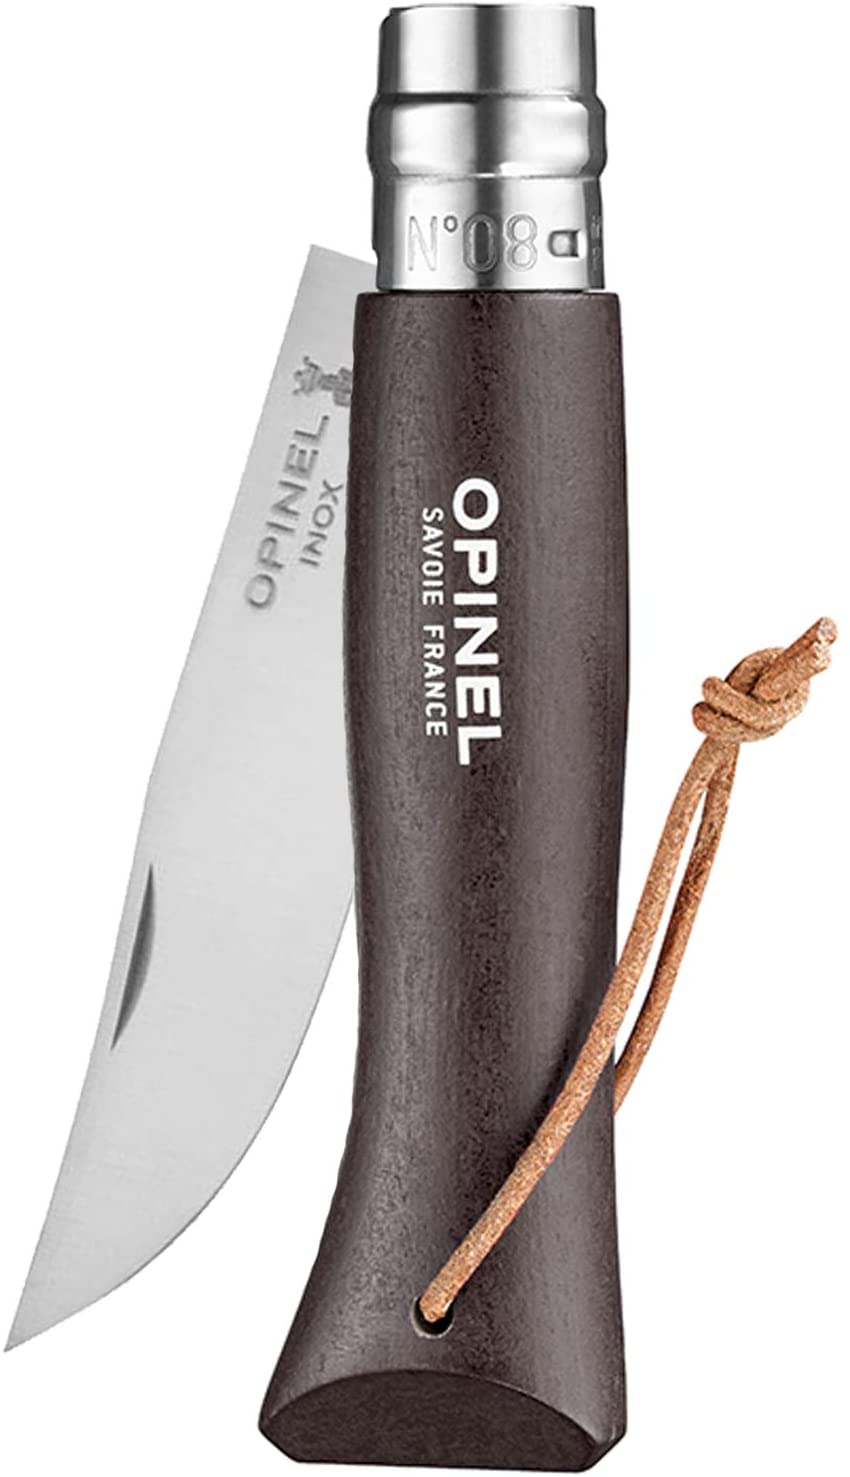 OPINEL No. 08 Colorama Earth